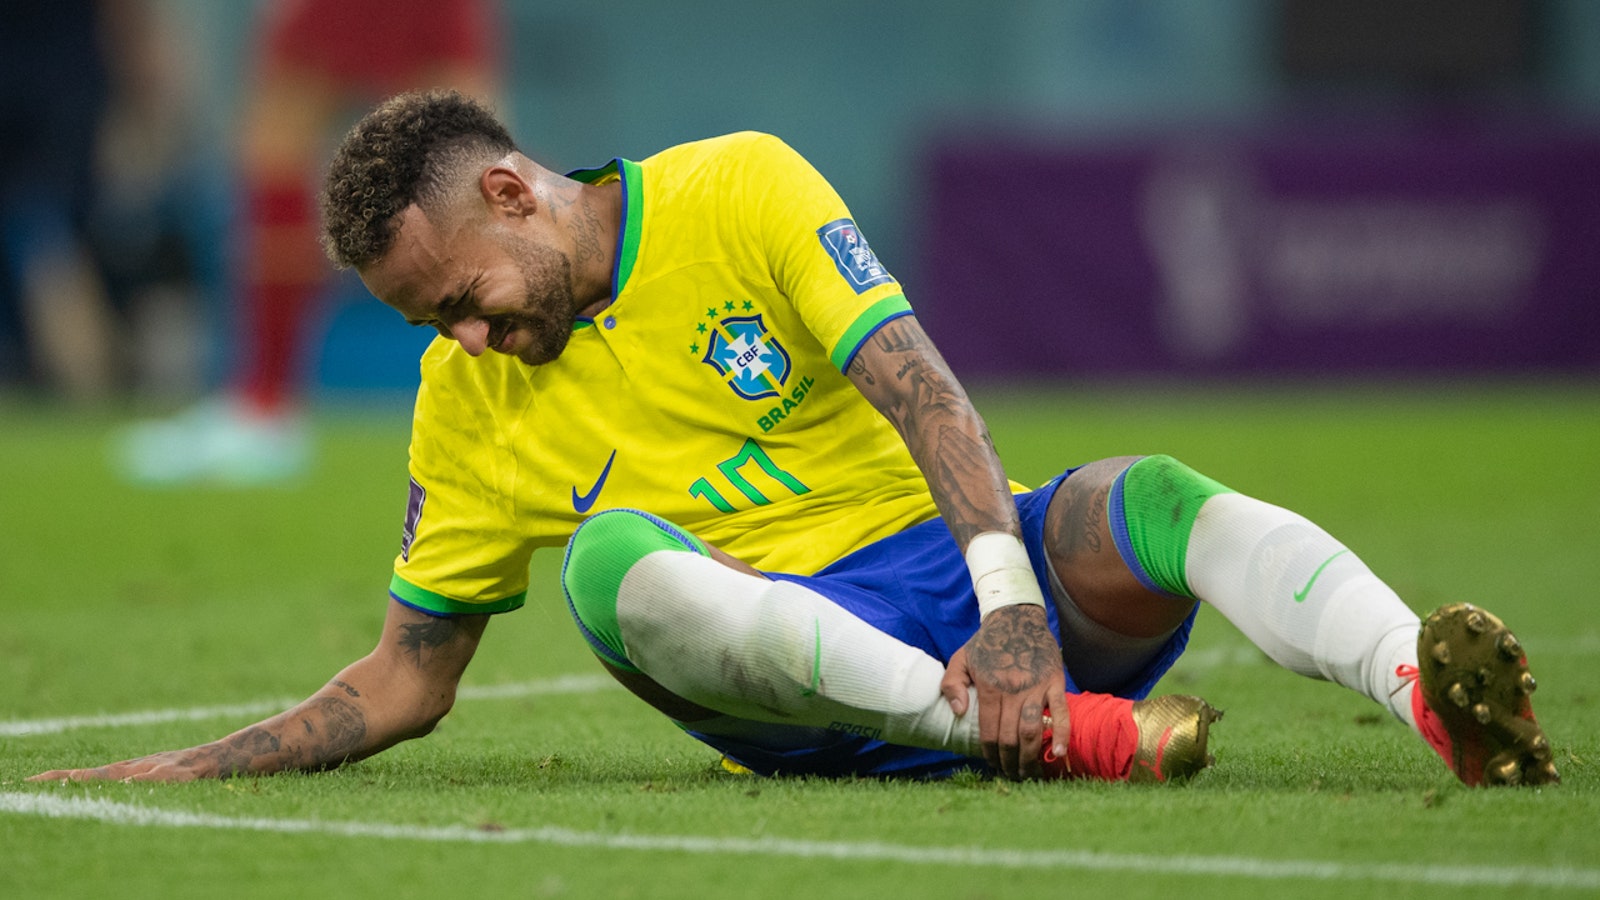 Brazil's Neymar suffers ankle injury and could miss 1-3 weeks